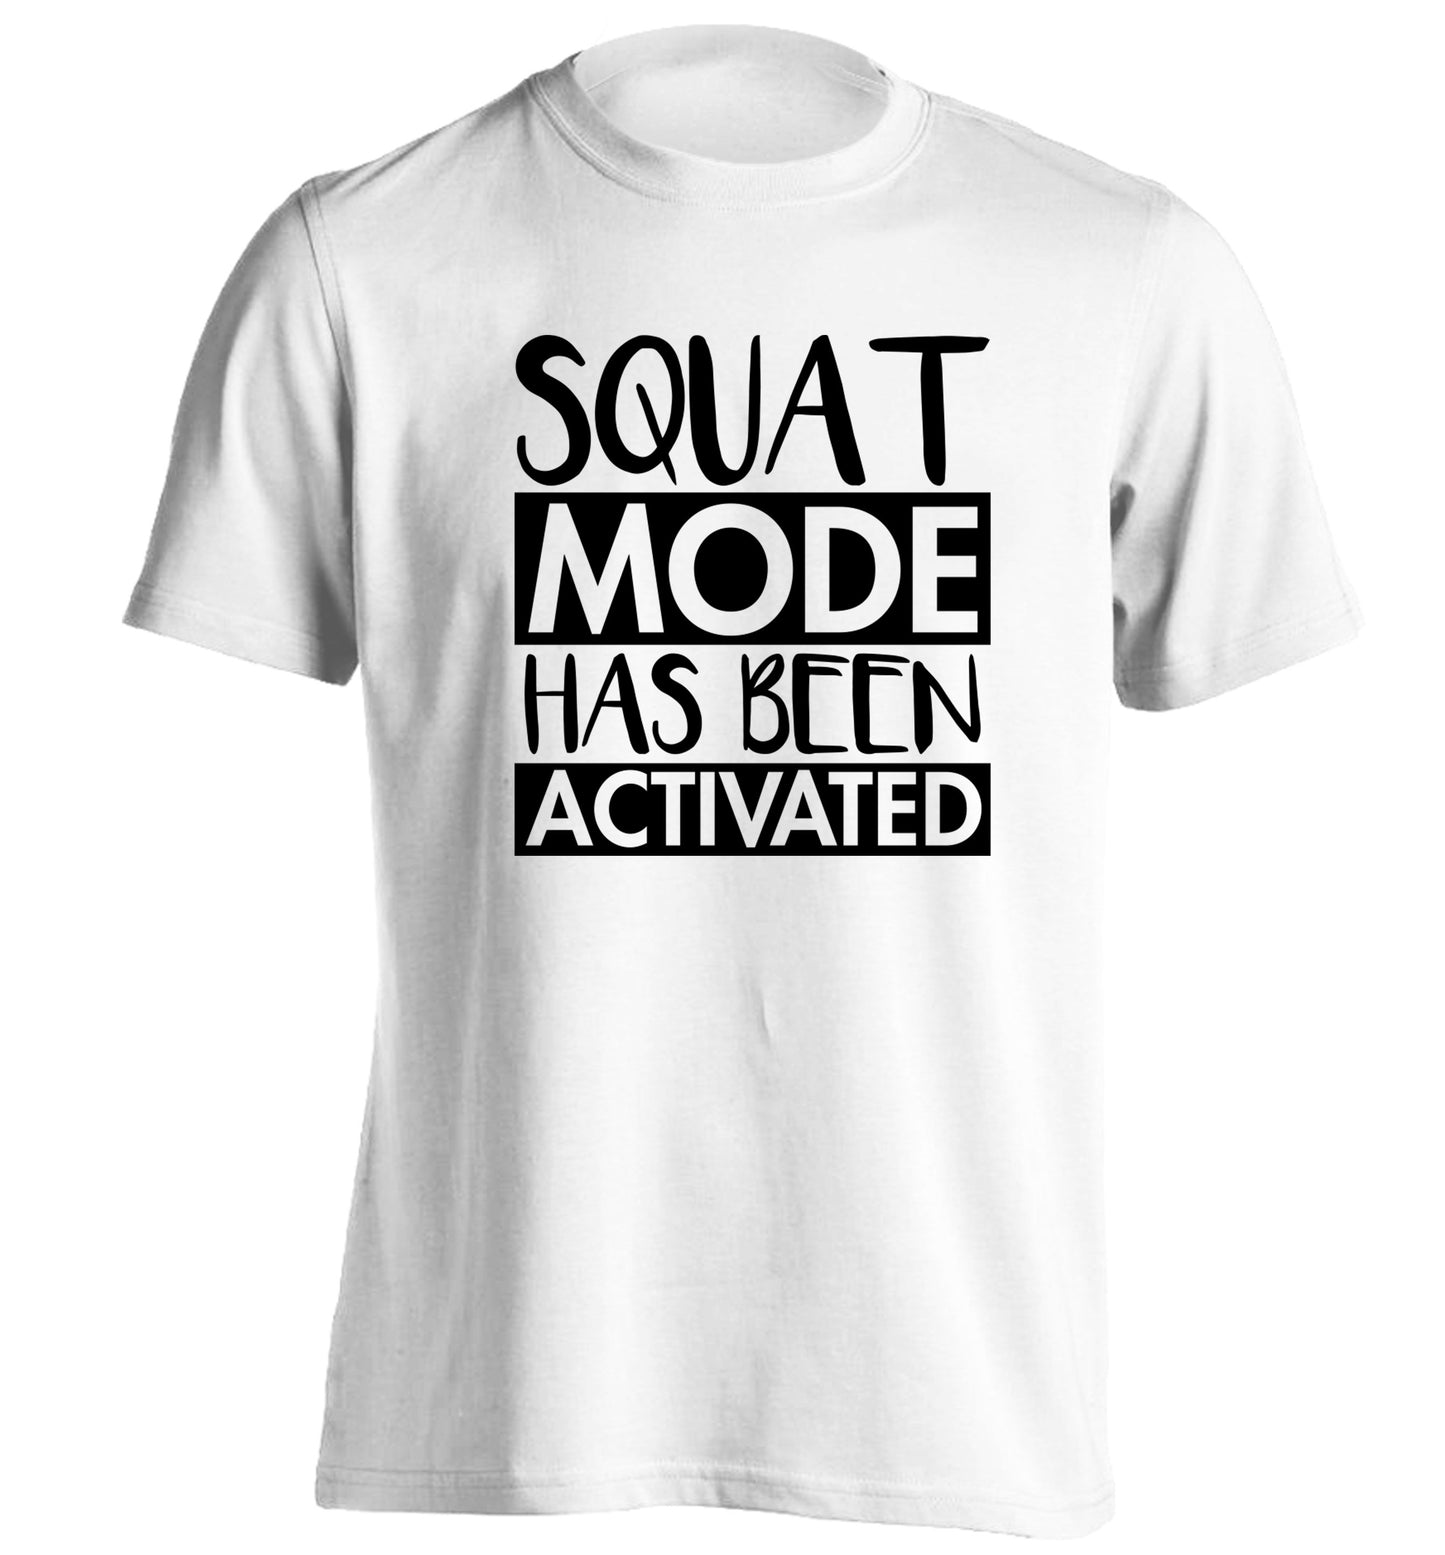 Squat mode activated adults unisex white Tshirt 2XL